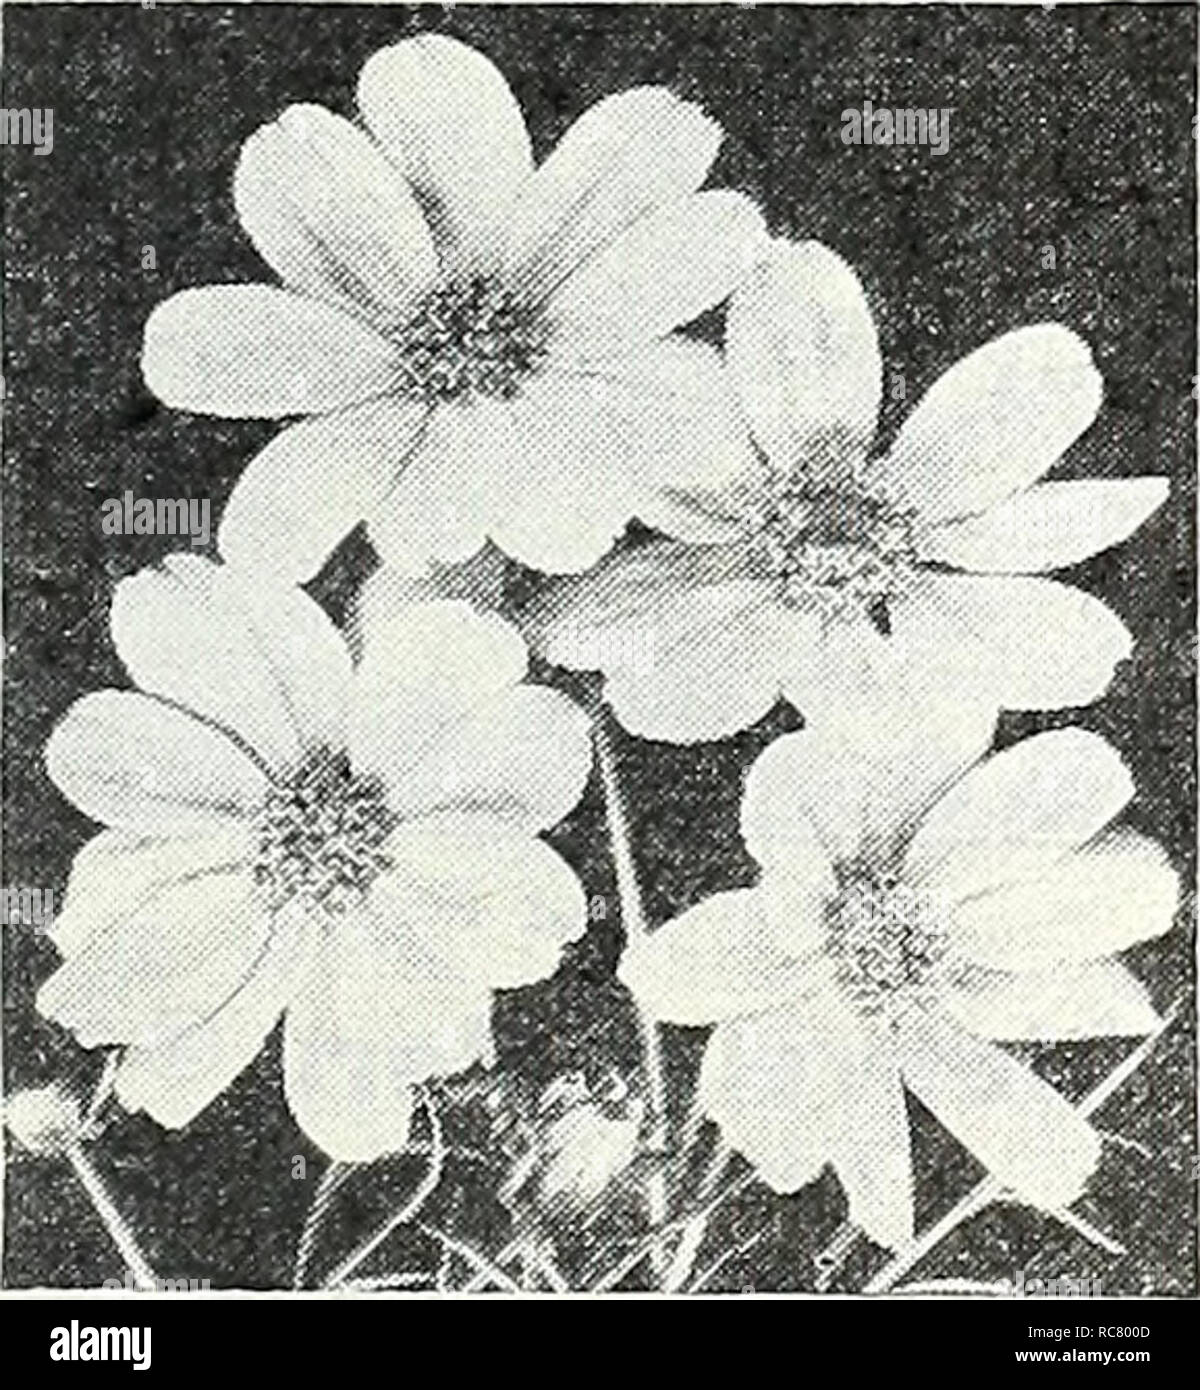 . Dreer's garden book for 1947. Seeds Catalogs; Nursery stock Catalogs; Gardening Equipment and supplies Catalogs; Flowers Seeds Catalogs; Vegetables Seeds Catalogs; Fruit Seeds Catalogs. Lathyrus latifolms Lathyrus [^p] ® § Hardy Sweet Pea A showj, tree - flowering, hardy climber tor covering old stumps*fences, etc. Blooms contmuoublv fiom mid- summer until trost. 5-0 feet. 2751 Latifolius, Pink Beauty. Fine rose-pink flower clusters. 2753 — Red (Splendens). Always ad- mired for its rich color. 2755 — White Pearl. Beautiful large, pure white flowers in large trusses. 2756 Mixed Colors. This i Stock Photo